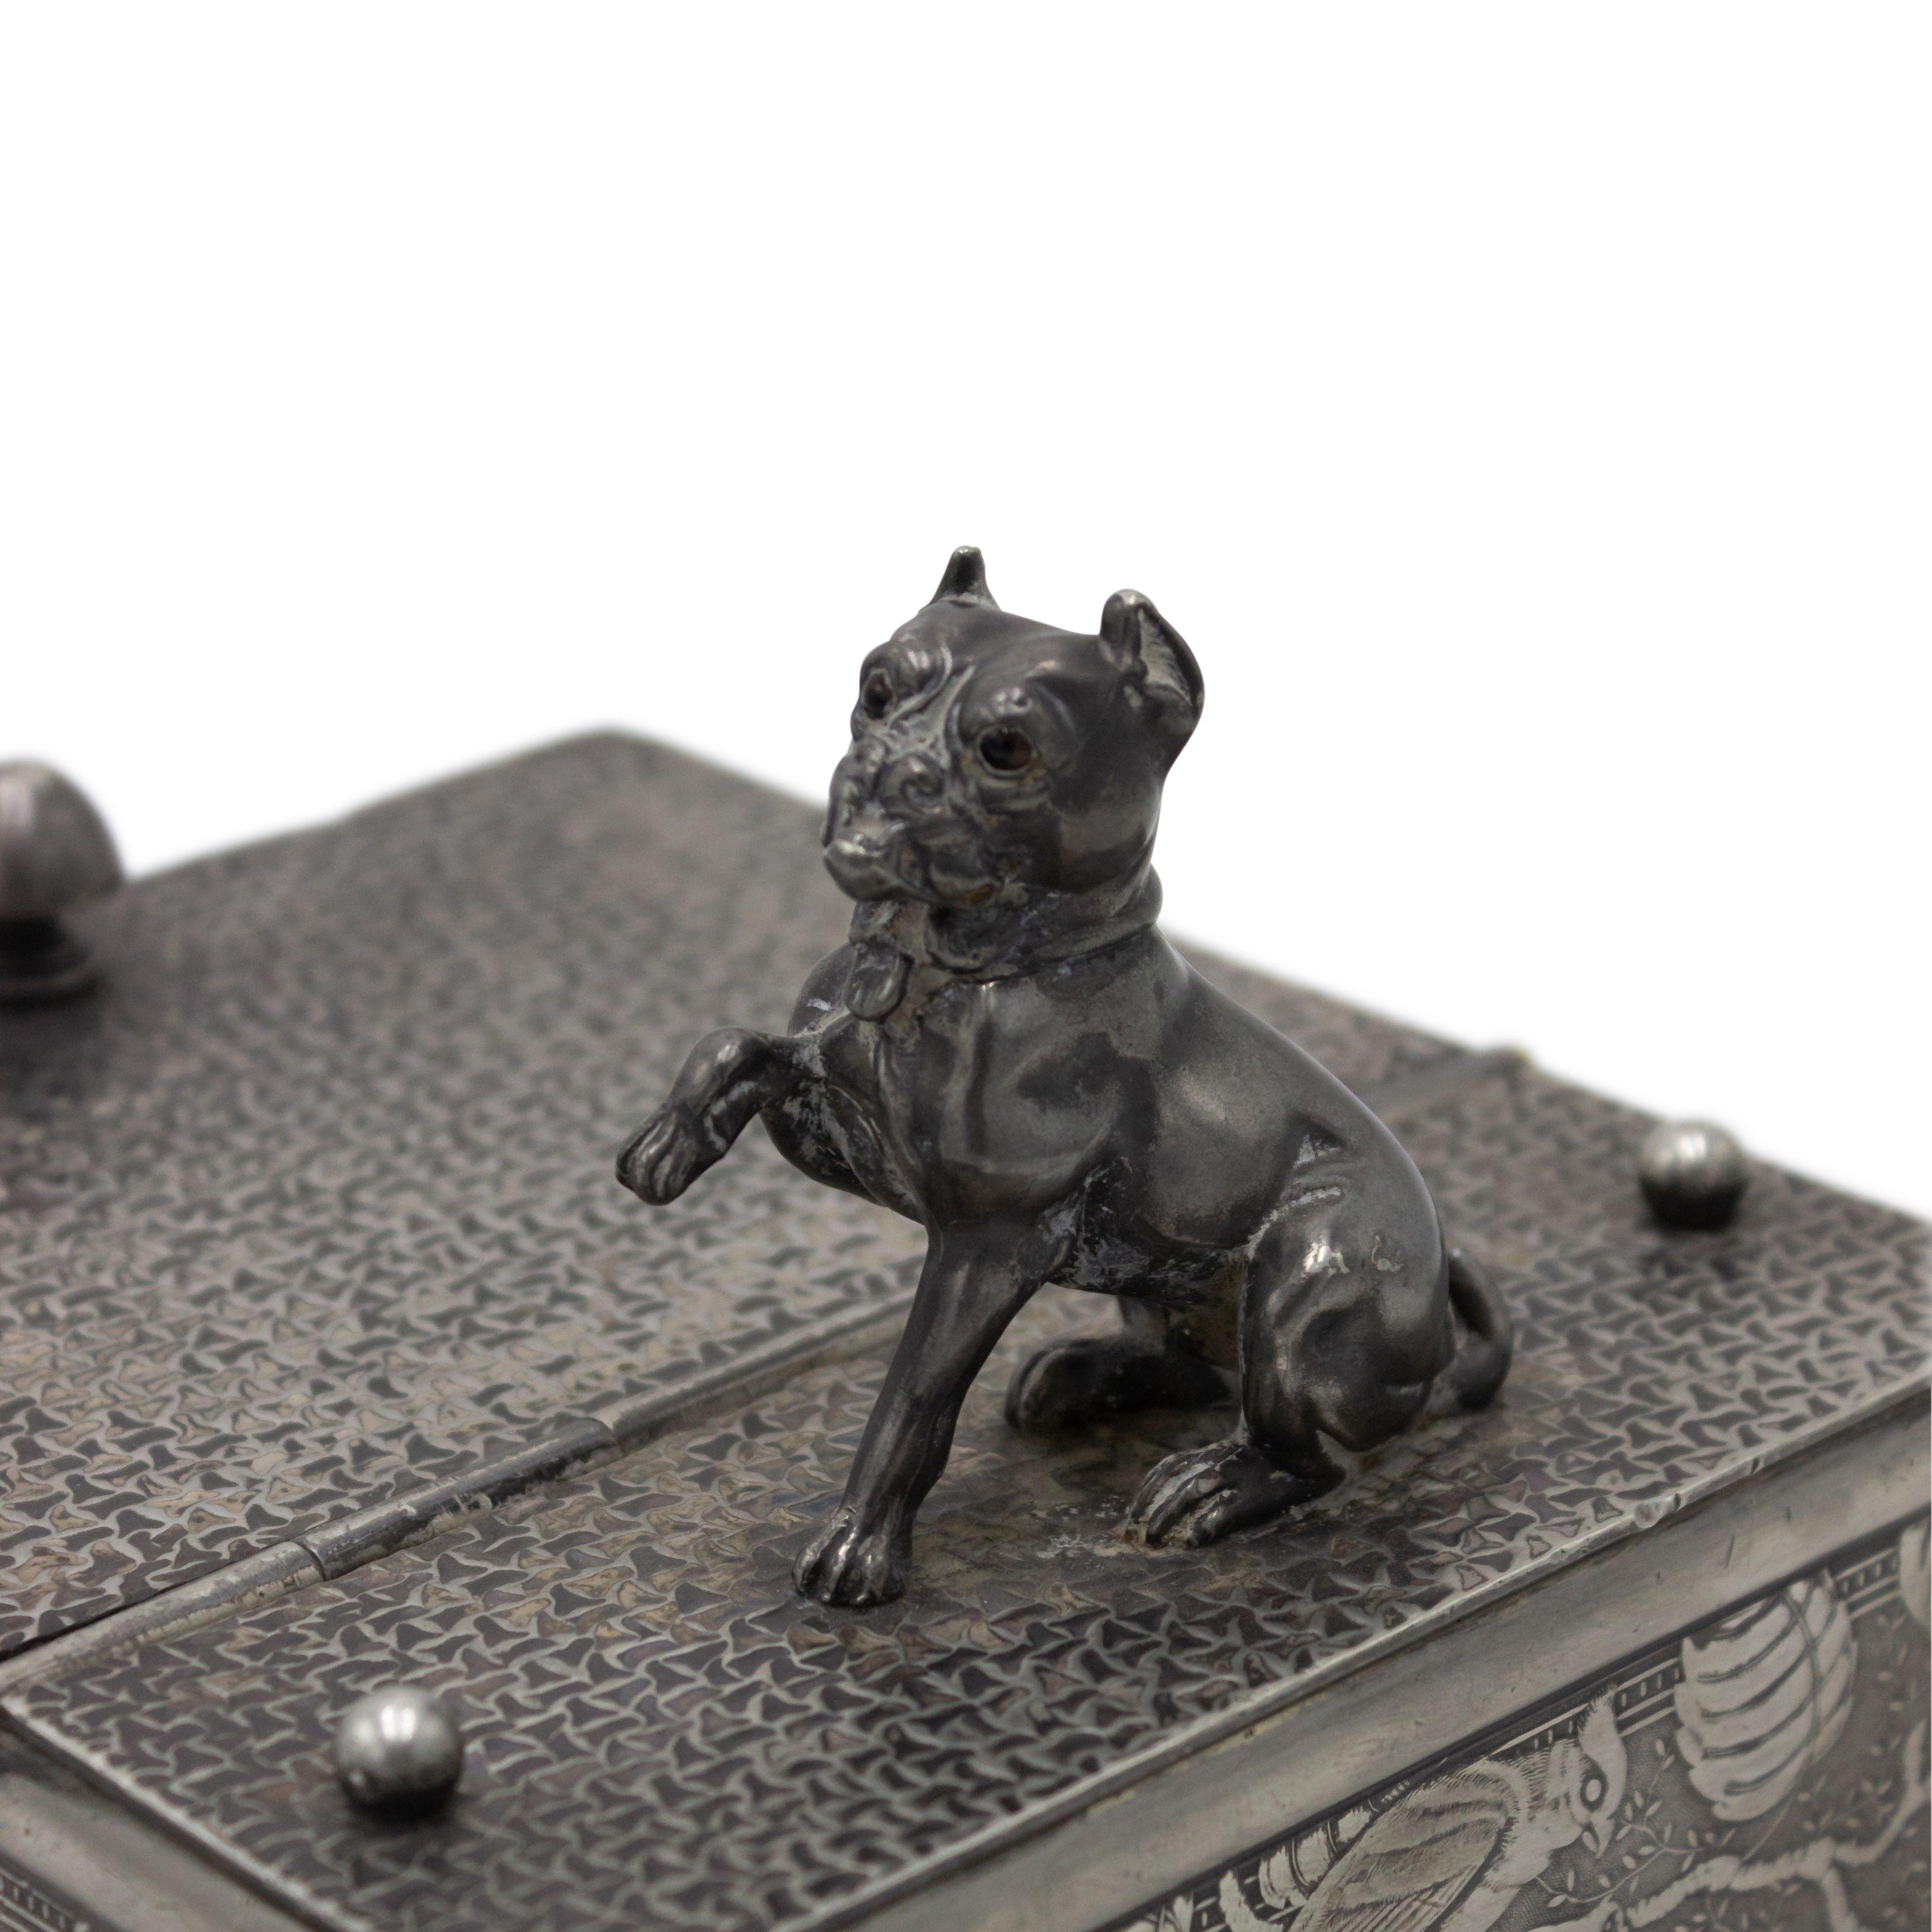 English Arts & Crafts pewter box with a floral & bird design and figure of a dog on top.
  